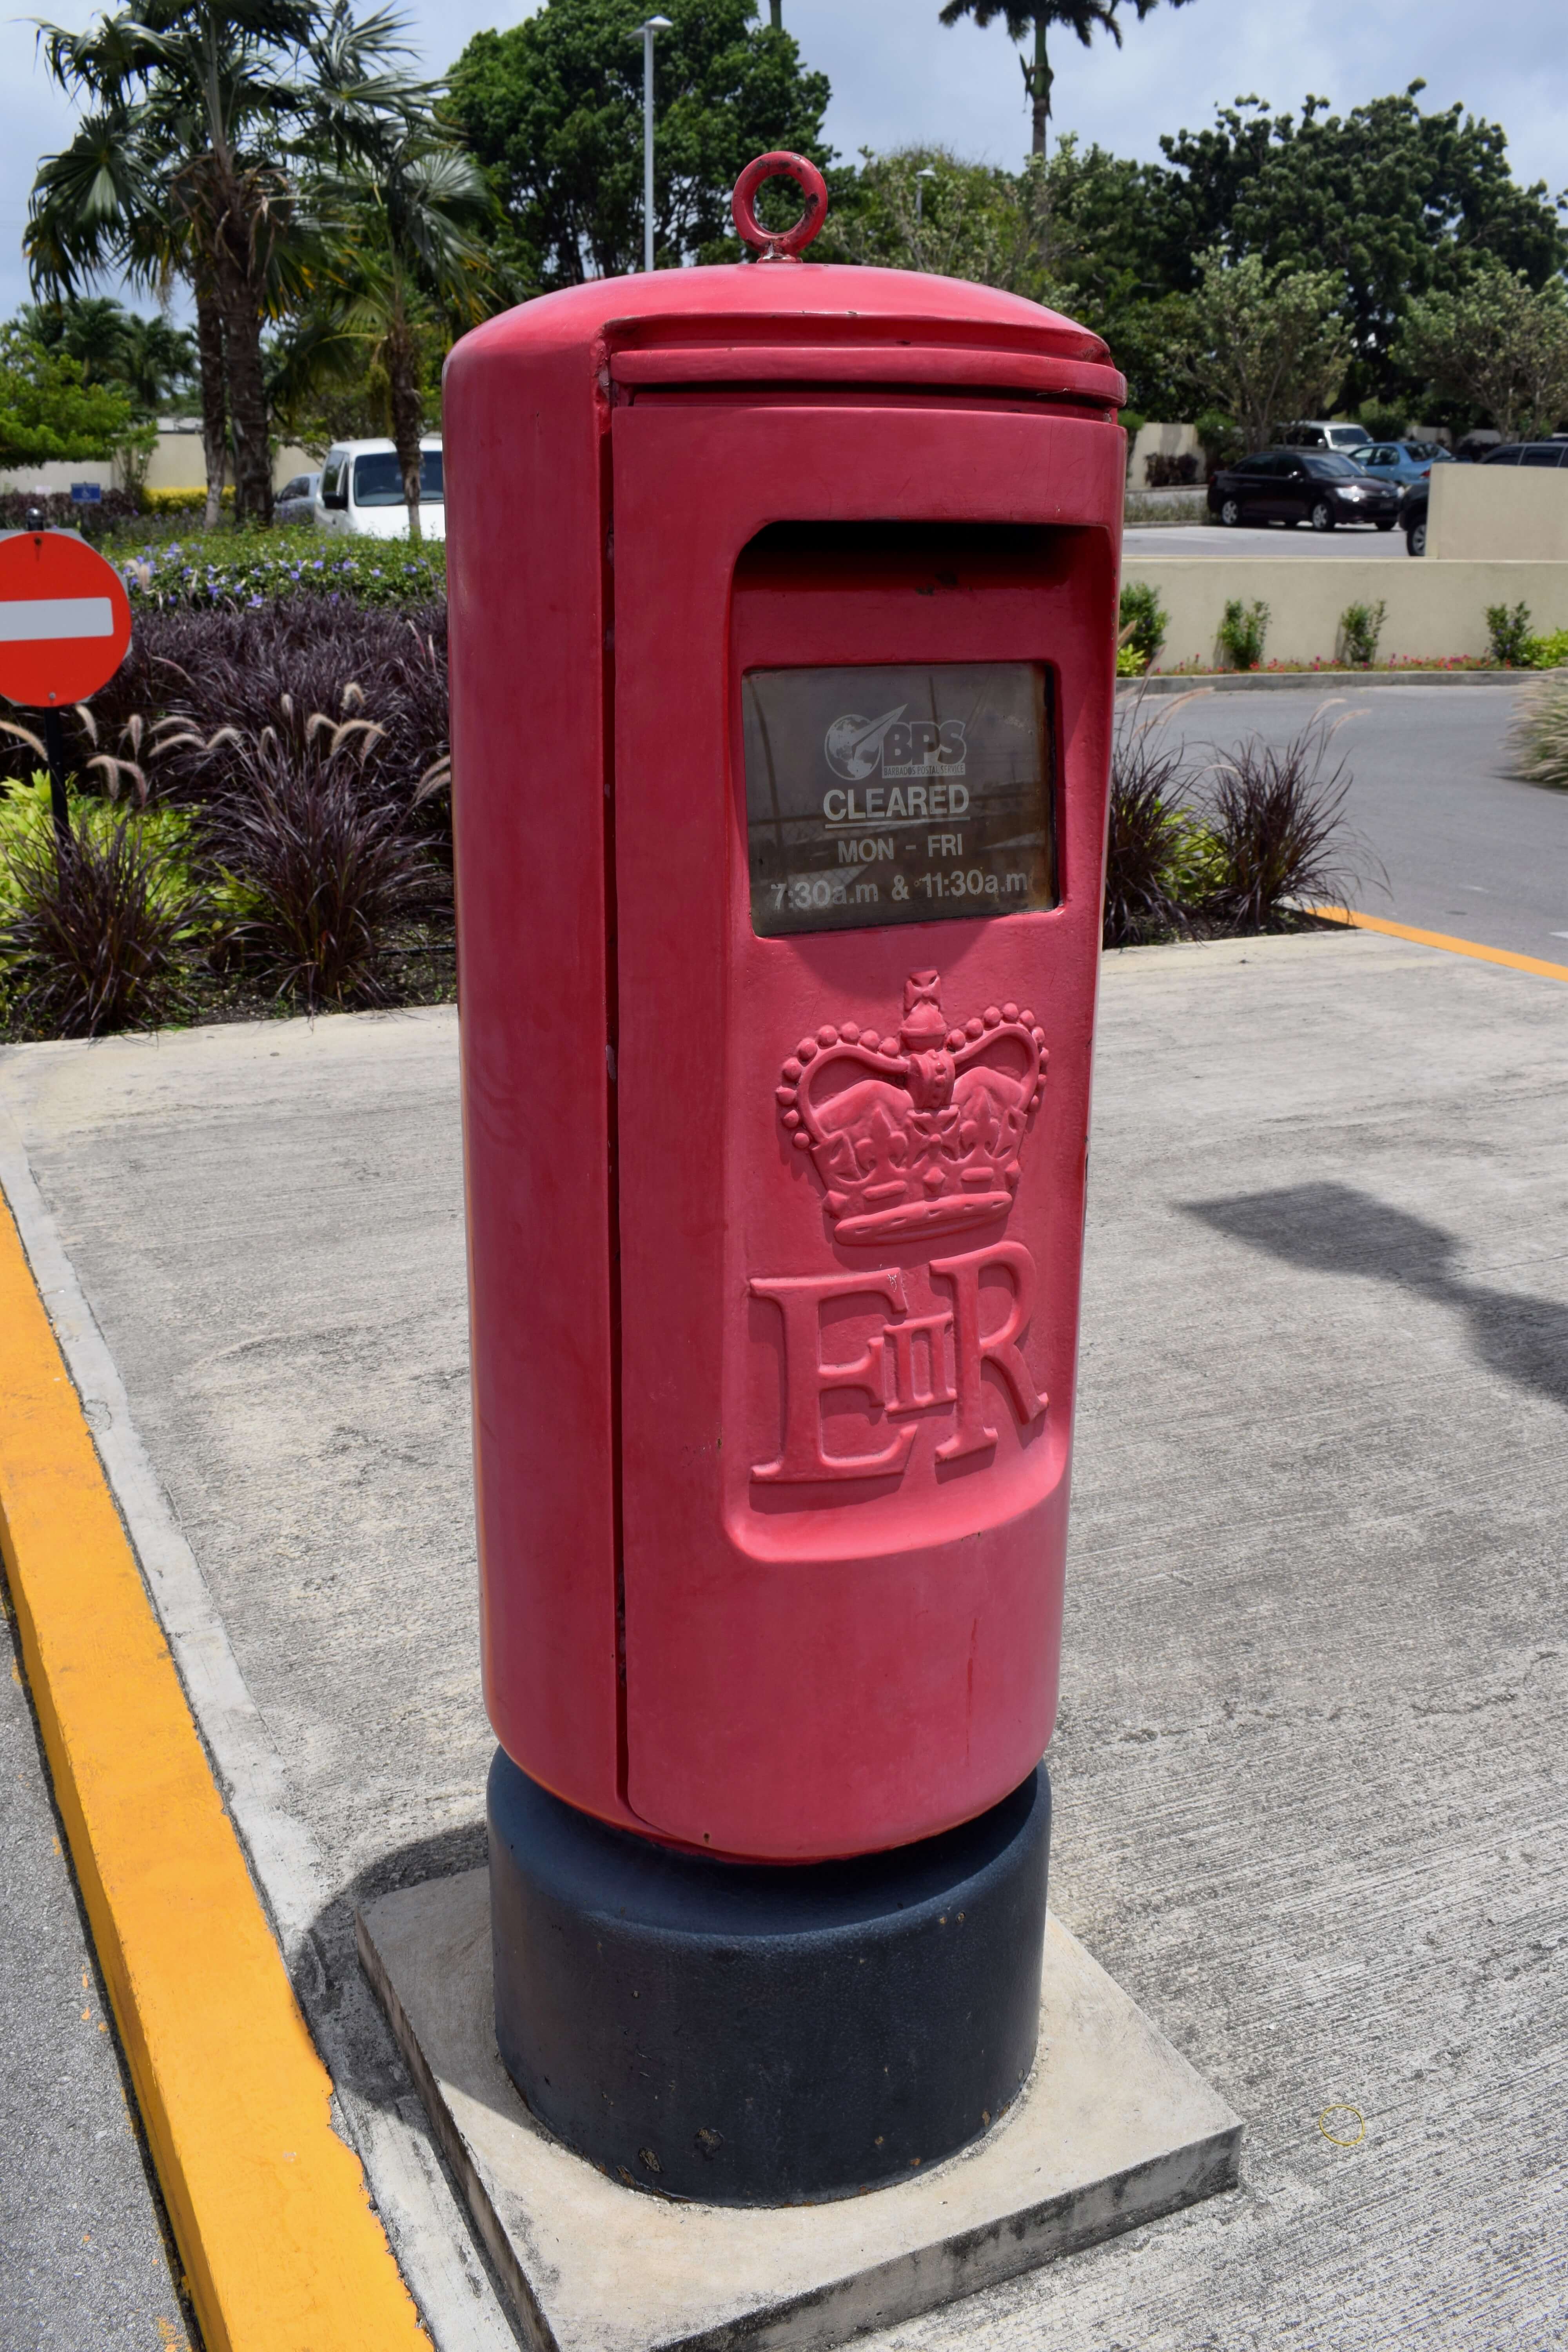 Post Box outside Warrens Post Office, Tower II, St Michael, Barbados